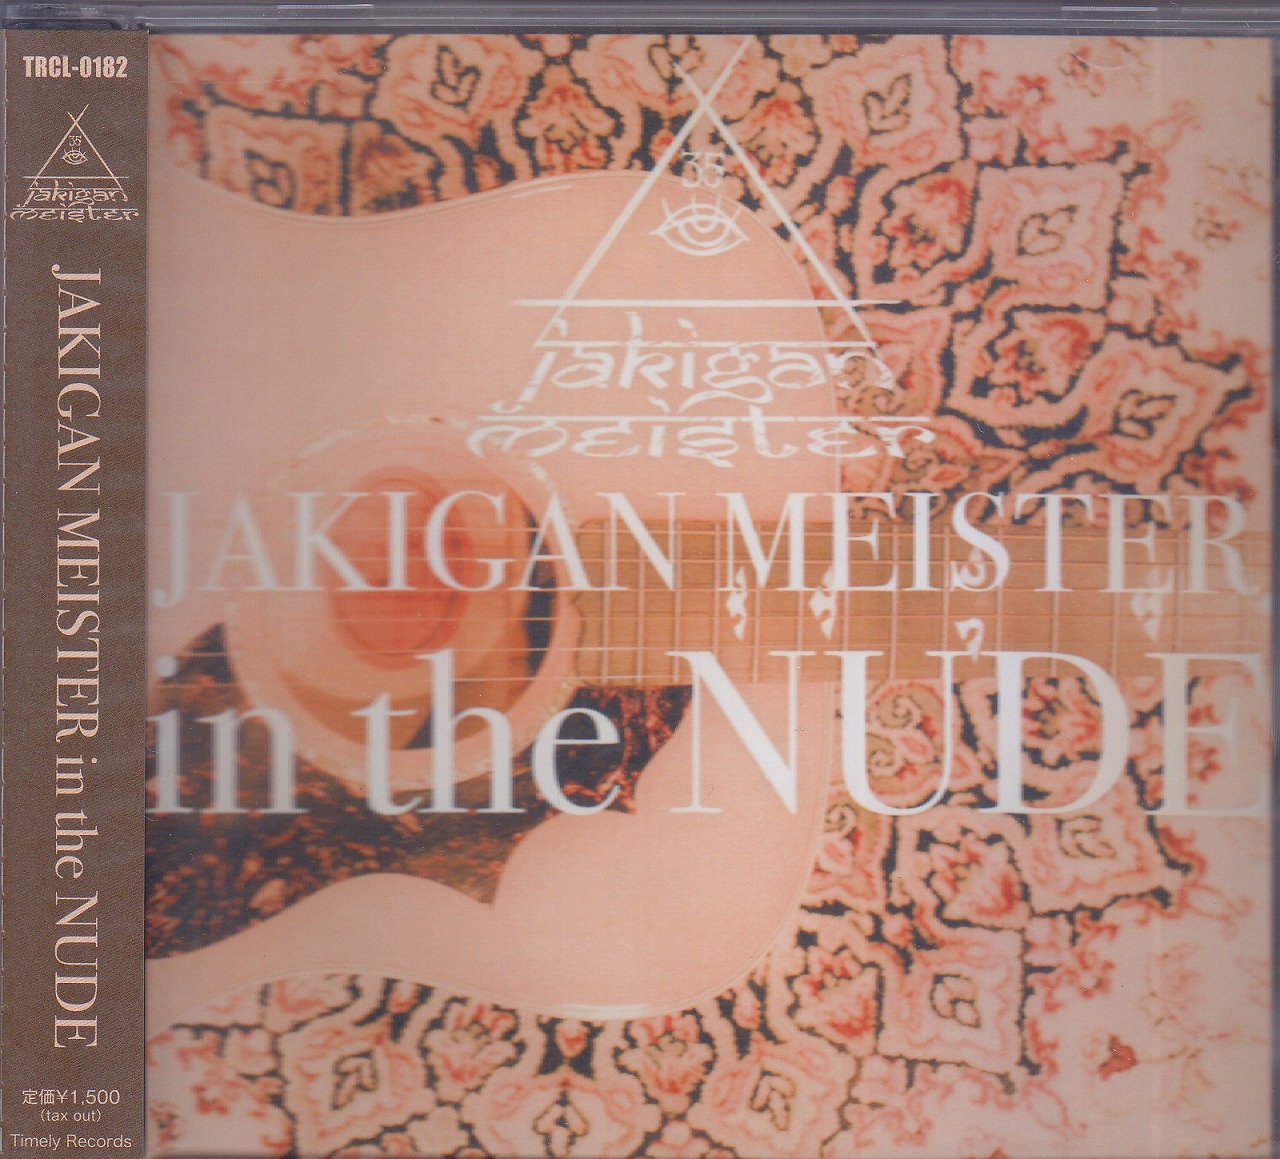 JAKIGAN MEISTER ( ジャキガンマイスター )  の CD in the NUDE